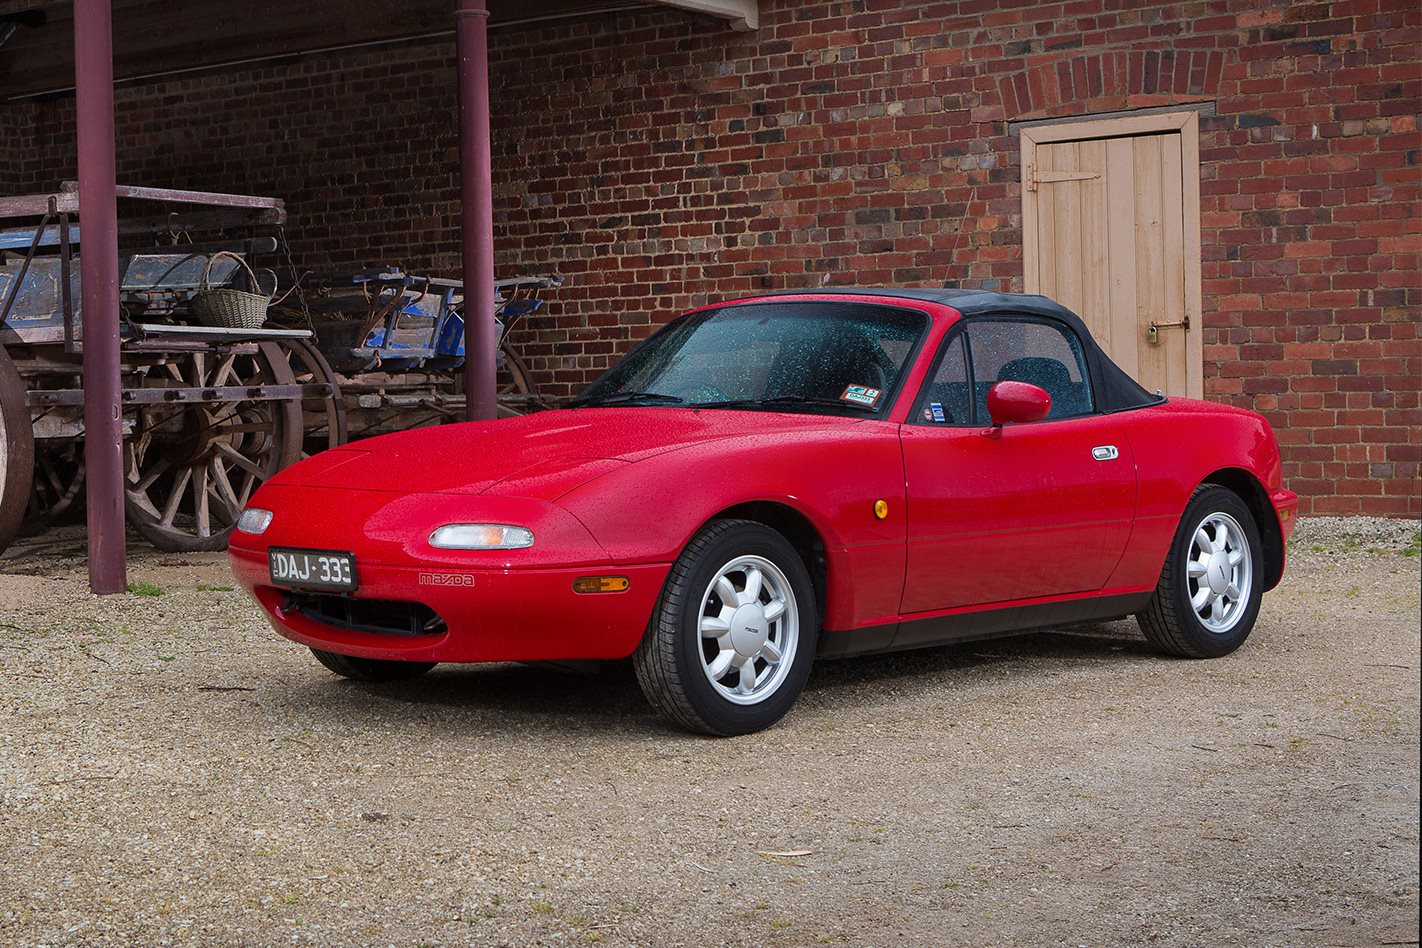 Retro: 1989 Mazda NA MX-5 - Roofless for the people